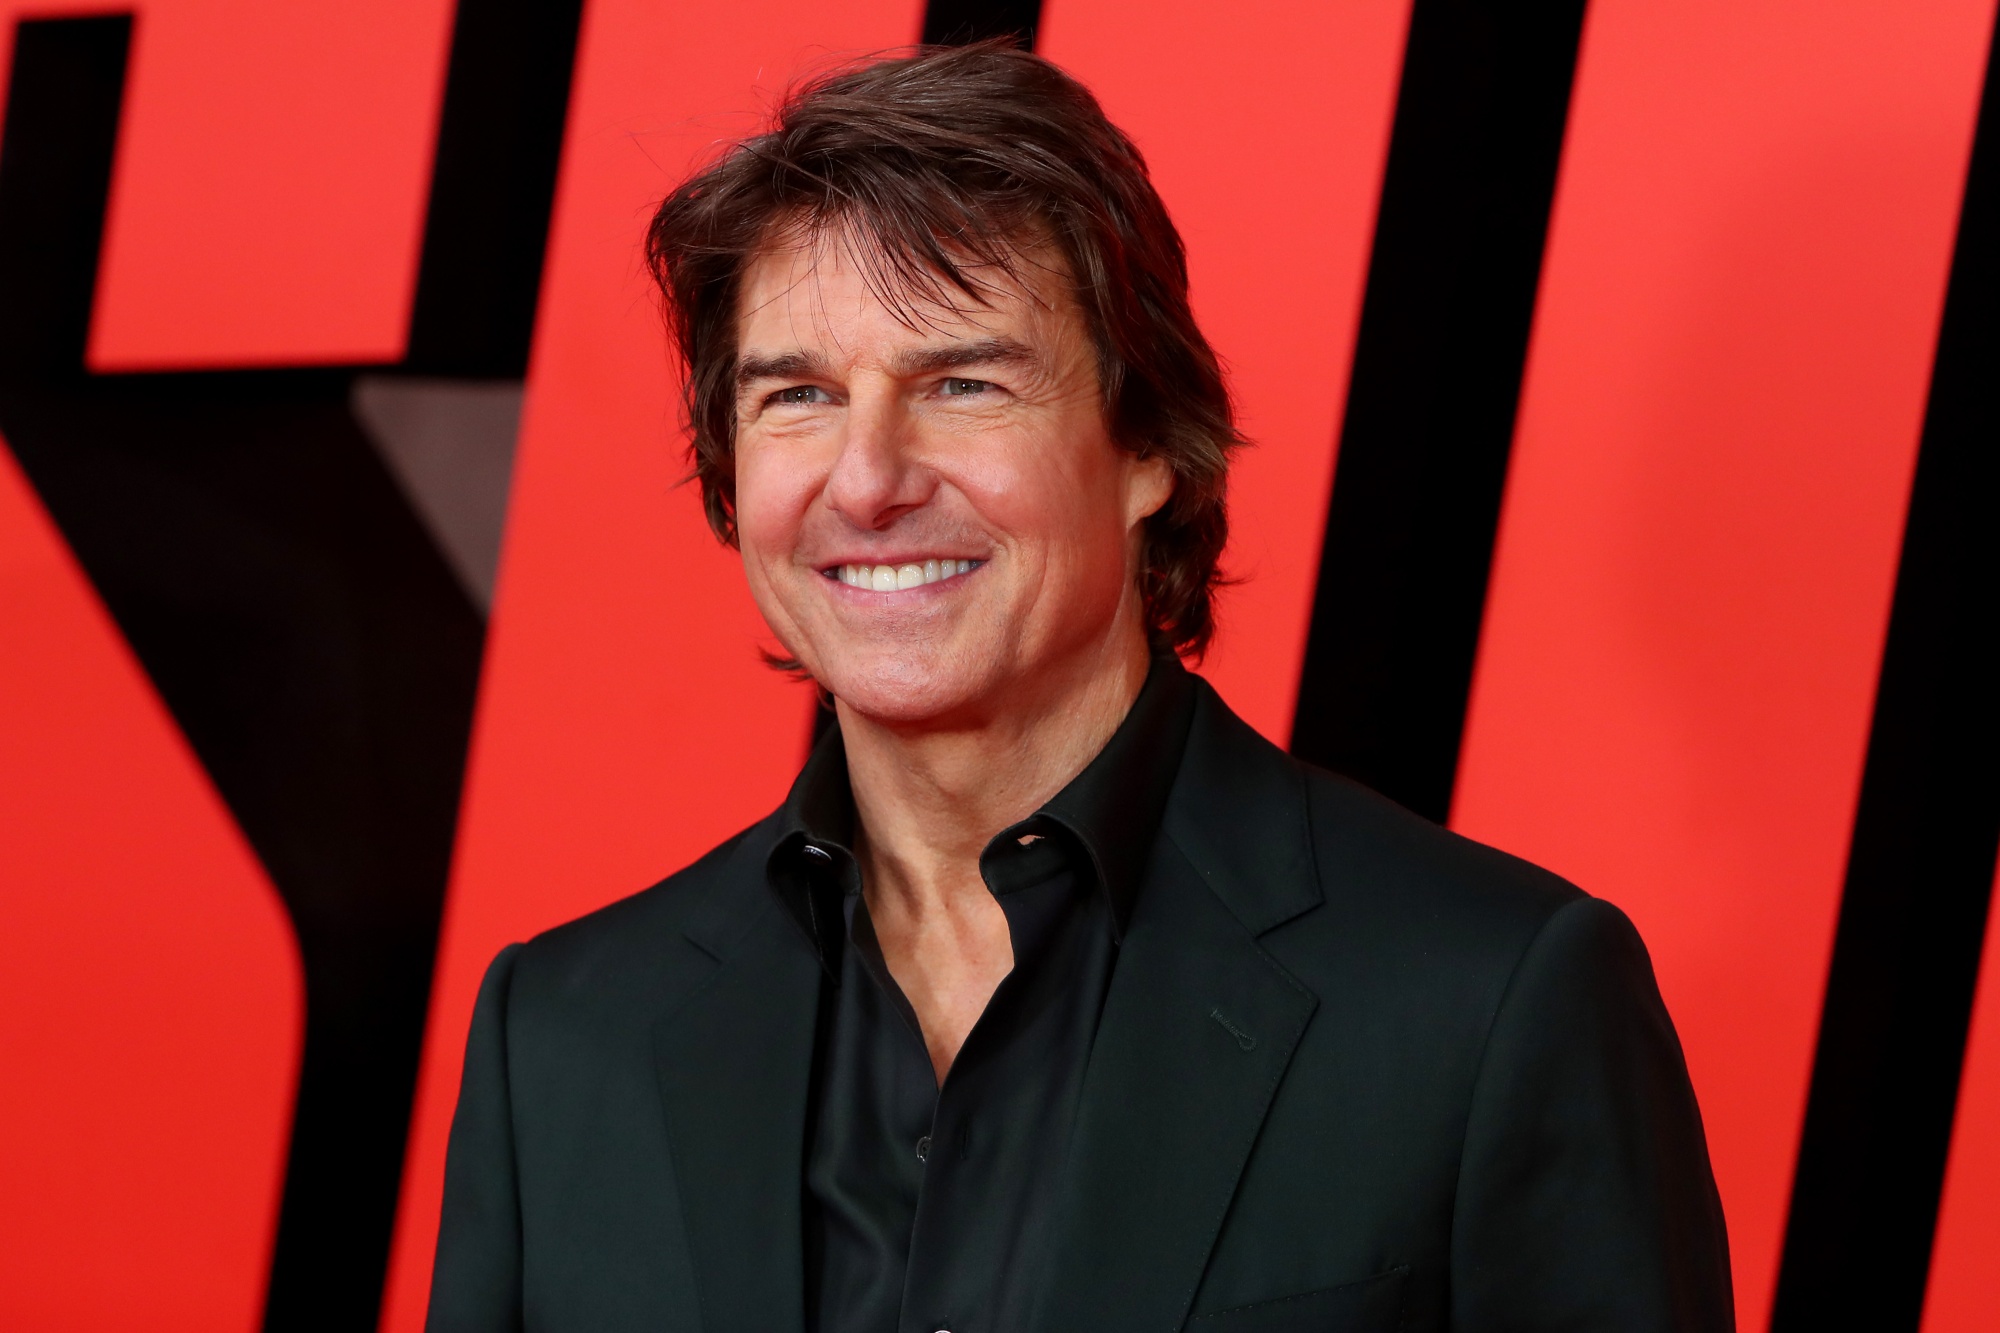 Tom Cruise Partners With Warner Bros. (WBD) for New Film Franchises